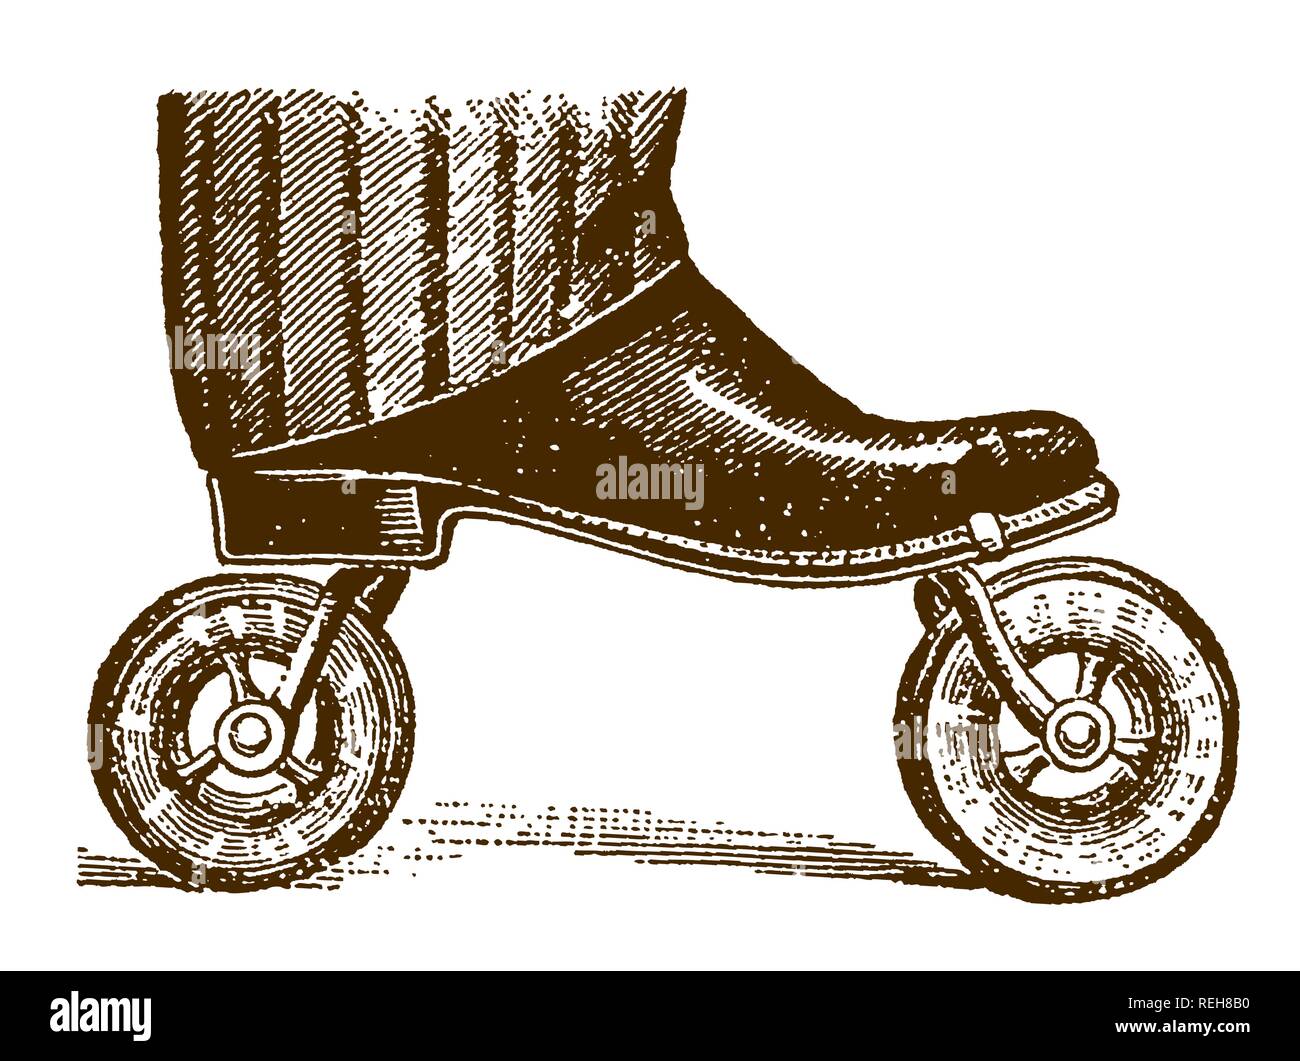 Historic roller skate with pneumatic tires clamped or strapped on the sole of a shoe (after an etching or engraving from the 19th century) Stock Vector